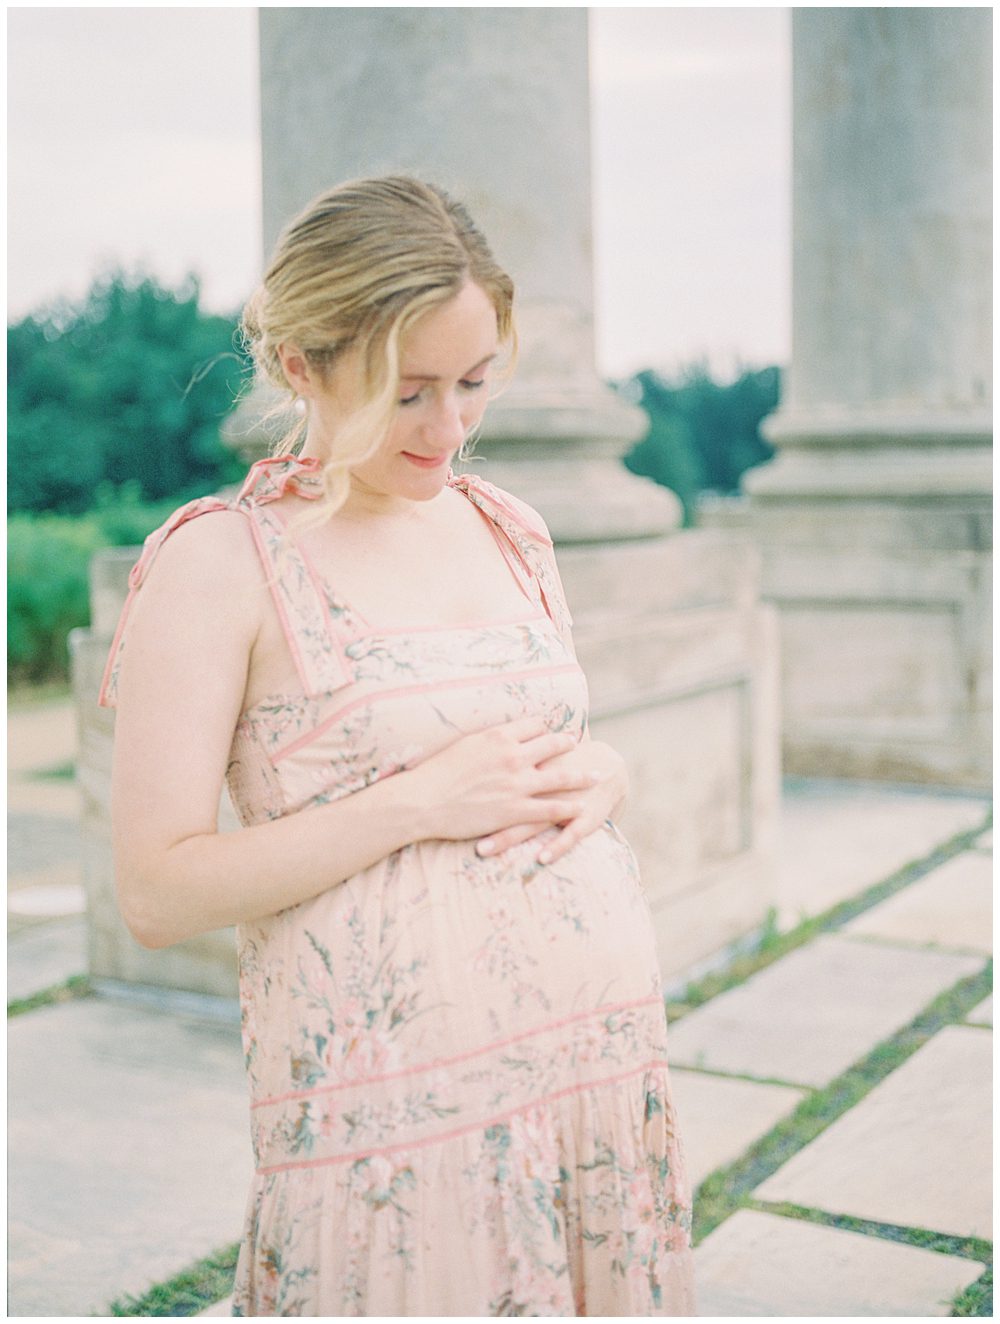 Pregnant mother places her hands on top of her belly during her maternity session at the National Arboretum.